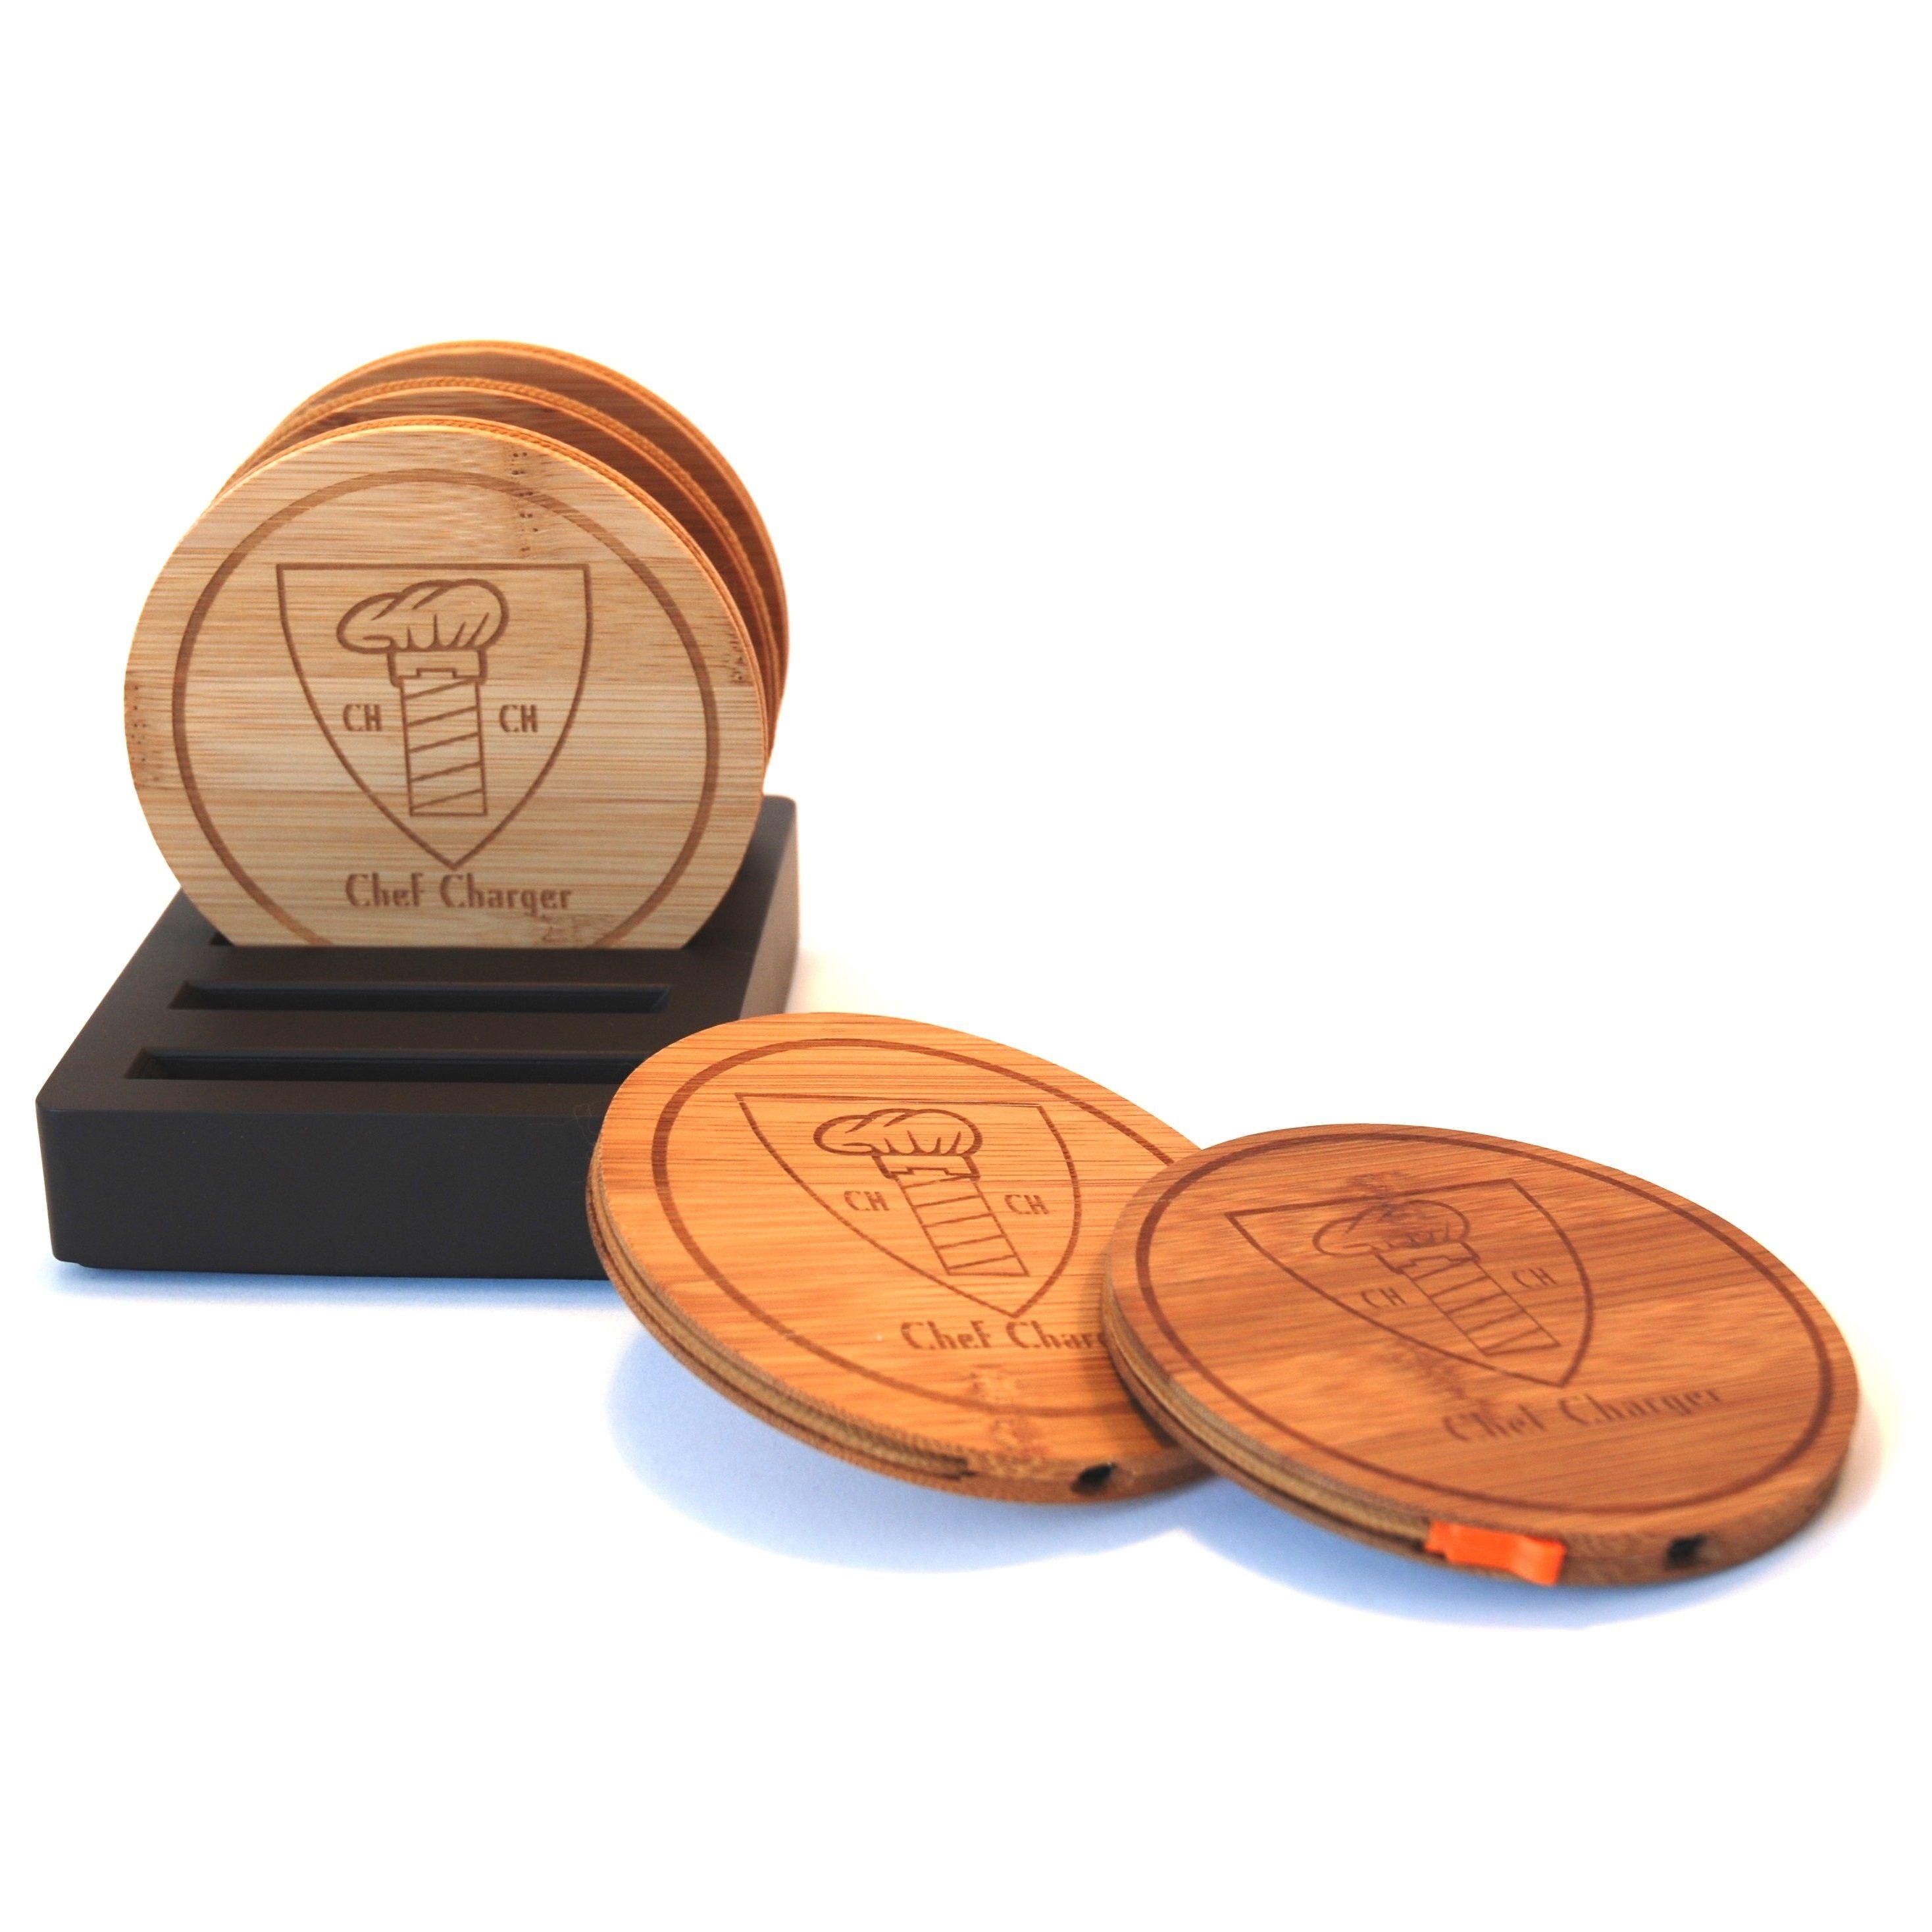 Bamboo Money Logo - Bamboo Drink Coaster, set of 5, with logo, SPECIAL OFFER - Chef Charger